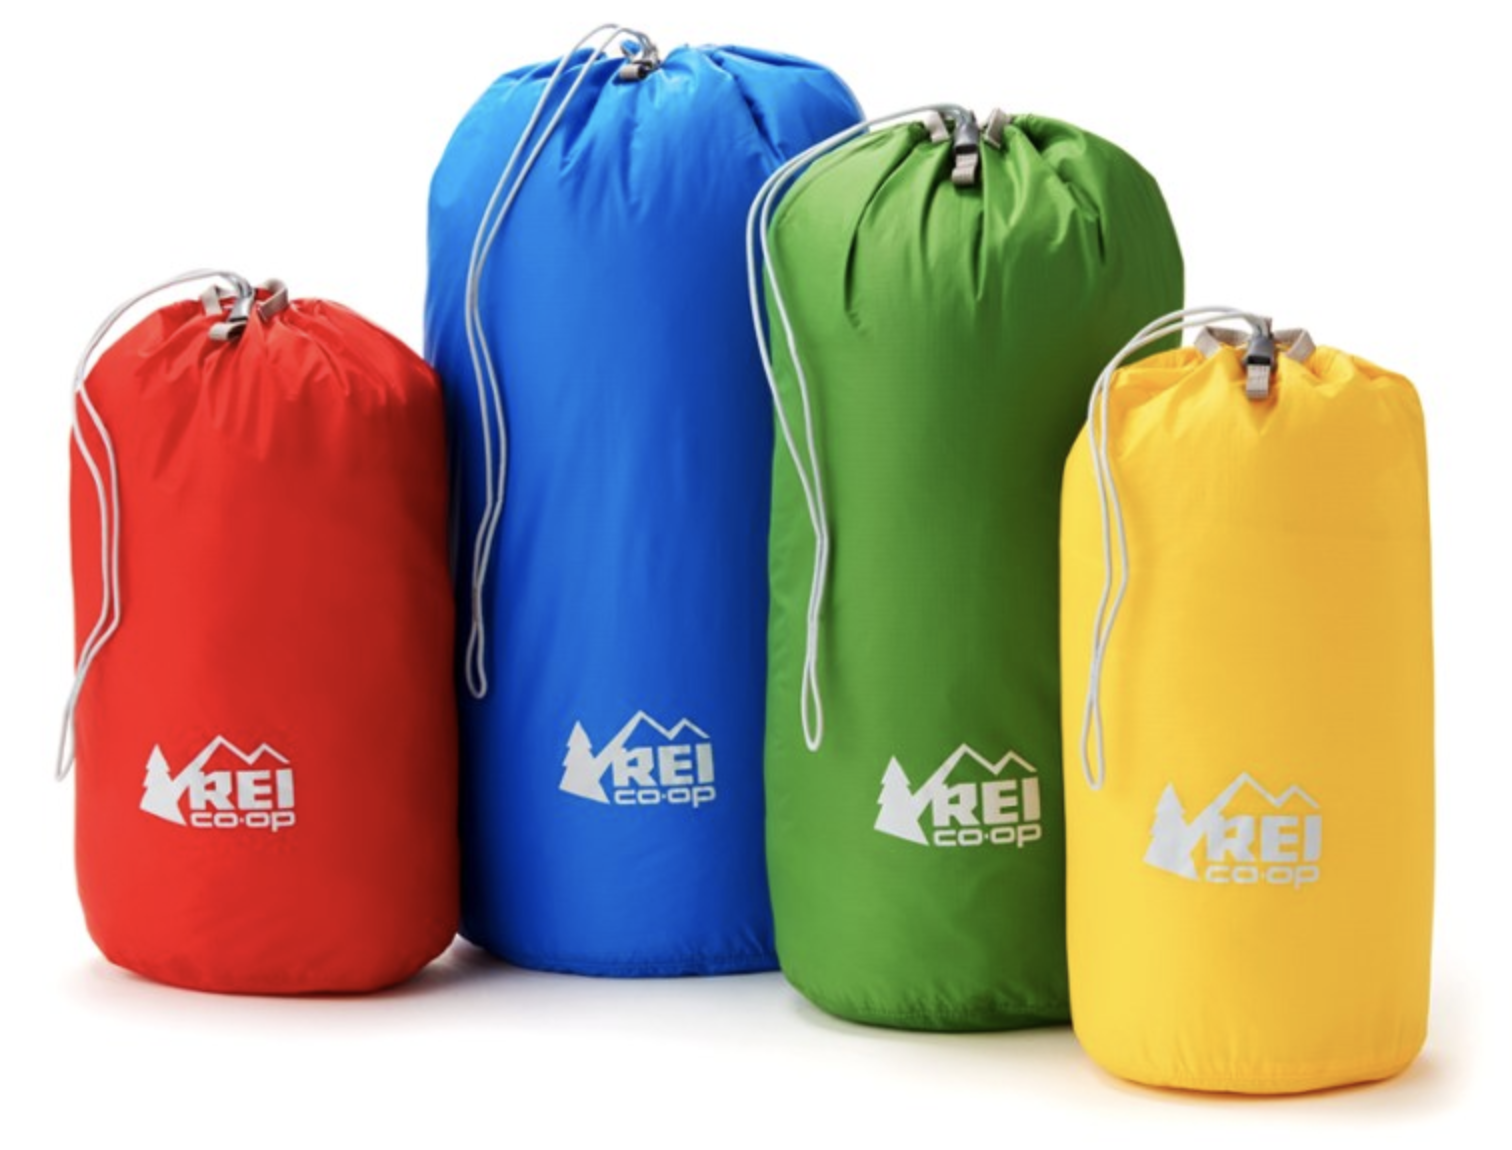 drawstring REI bags in four colors and sizes